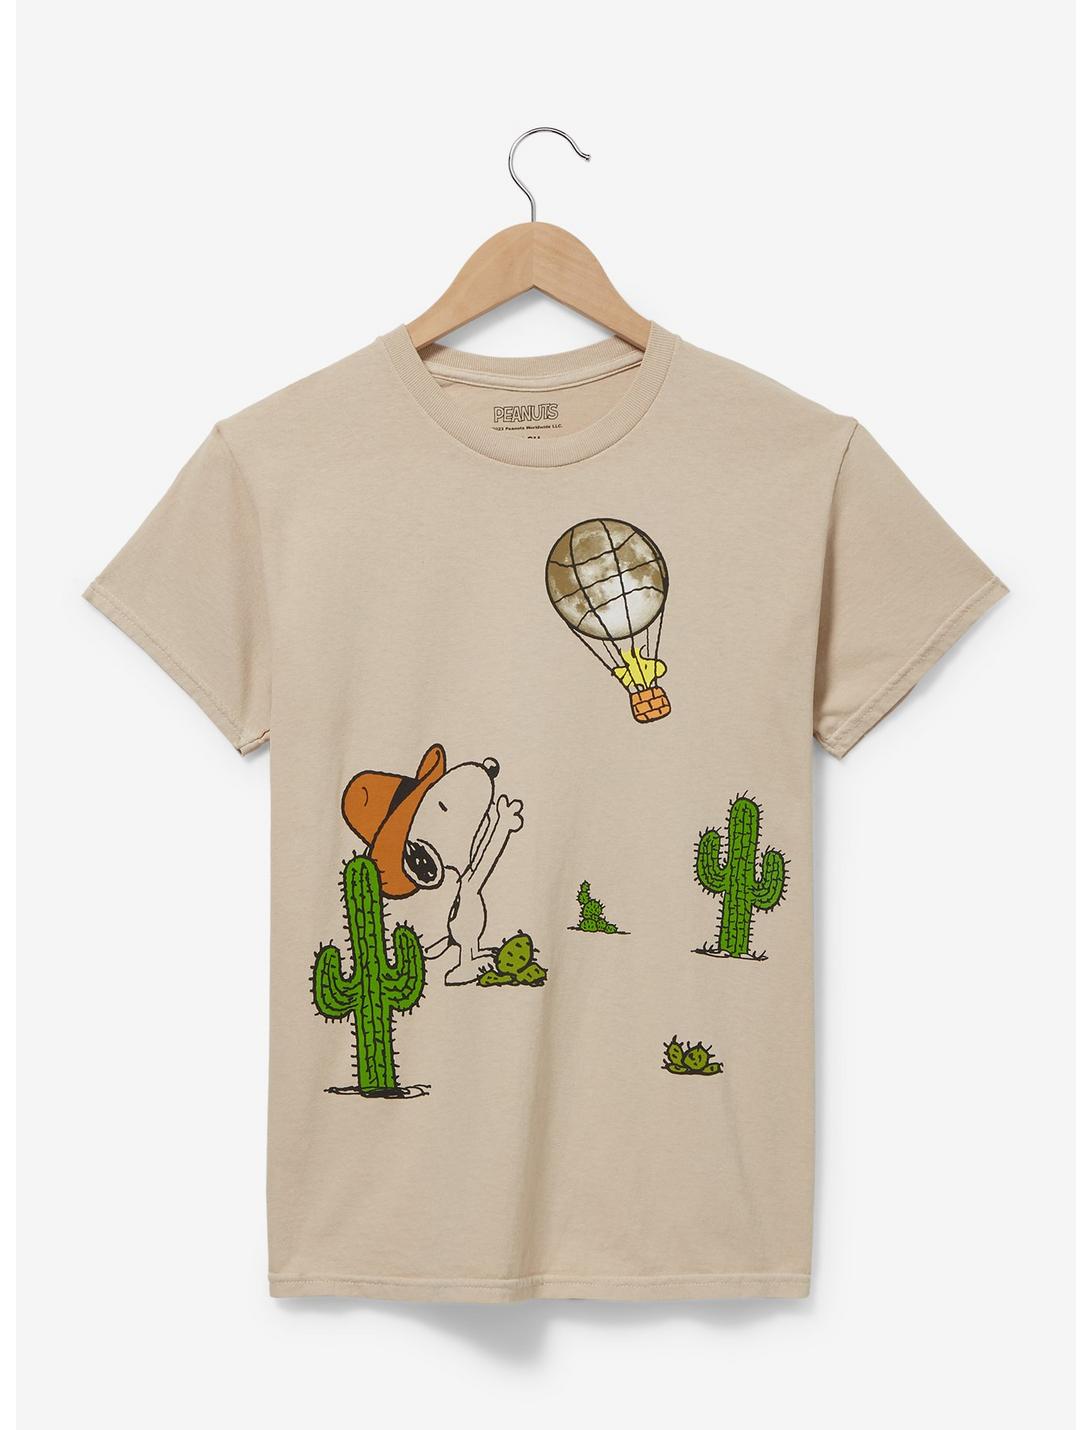 Peanuts Snoopy & Woodstock Western Portrait Women's T-Shirt - BoxLunch Exclusive, BROWN, hi-res